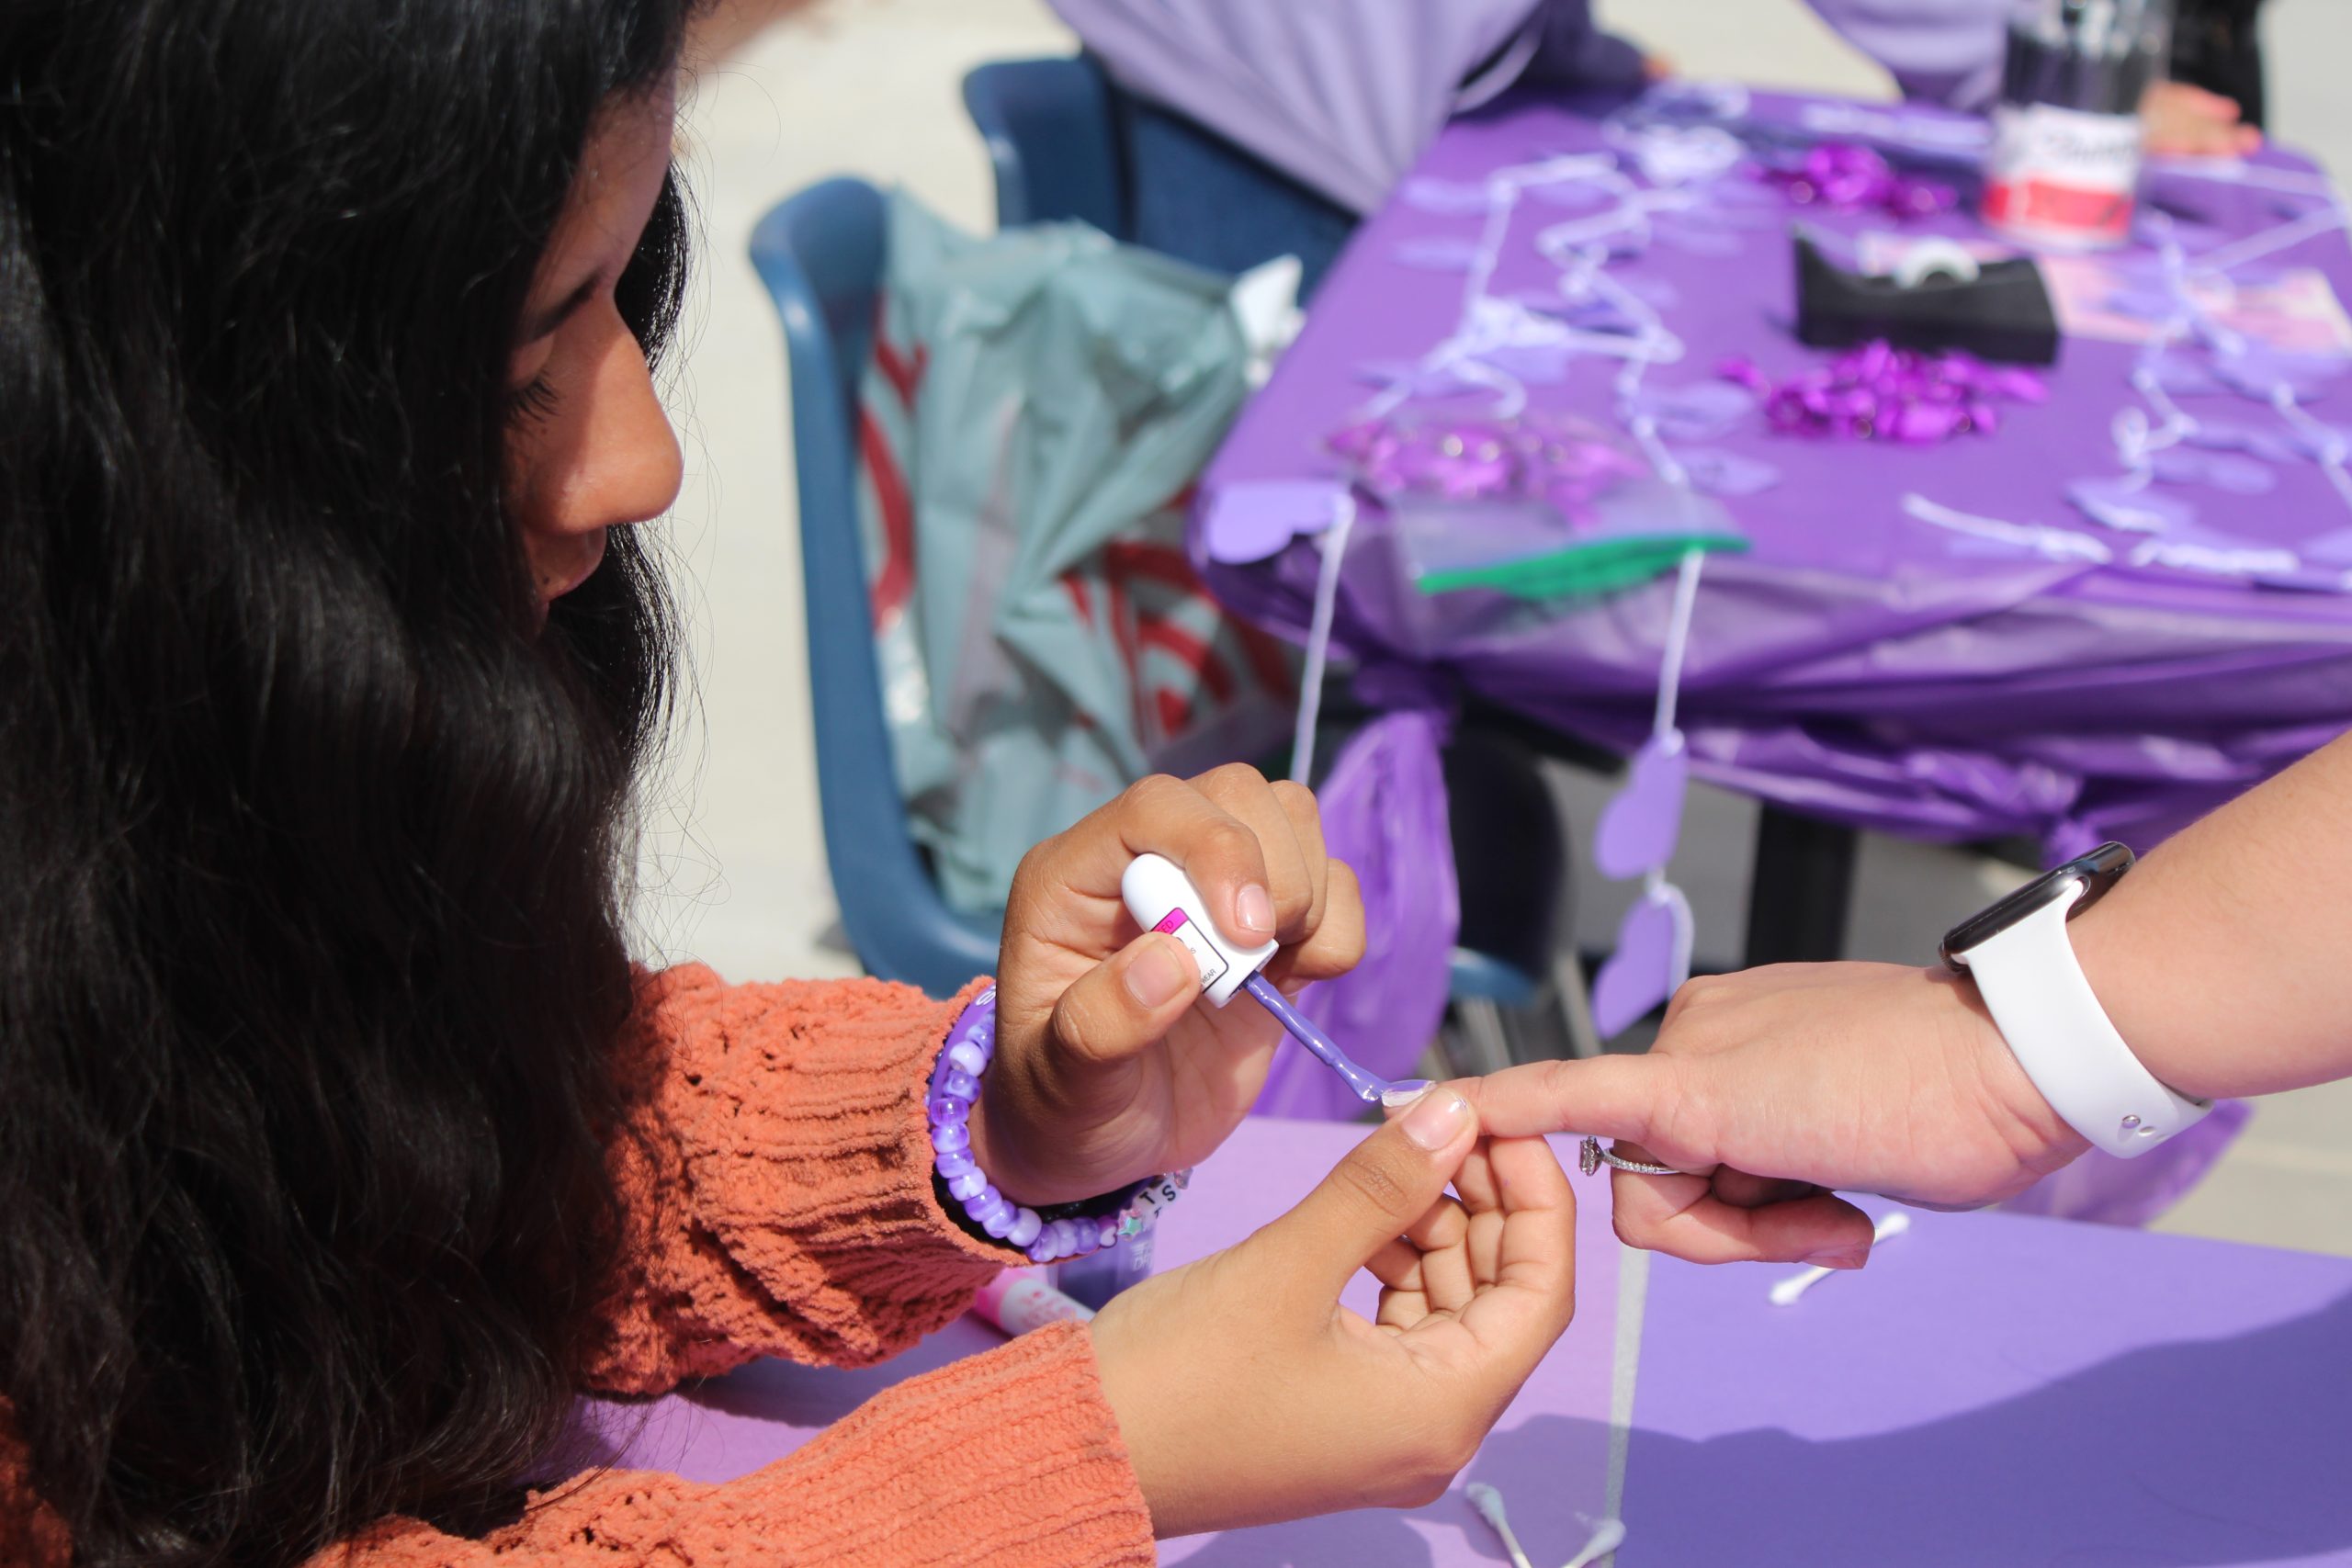 Ladies First members hosted this school-wide event to spread awareness of Domestic Violence to their peers.